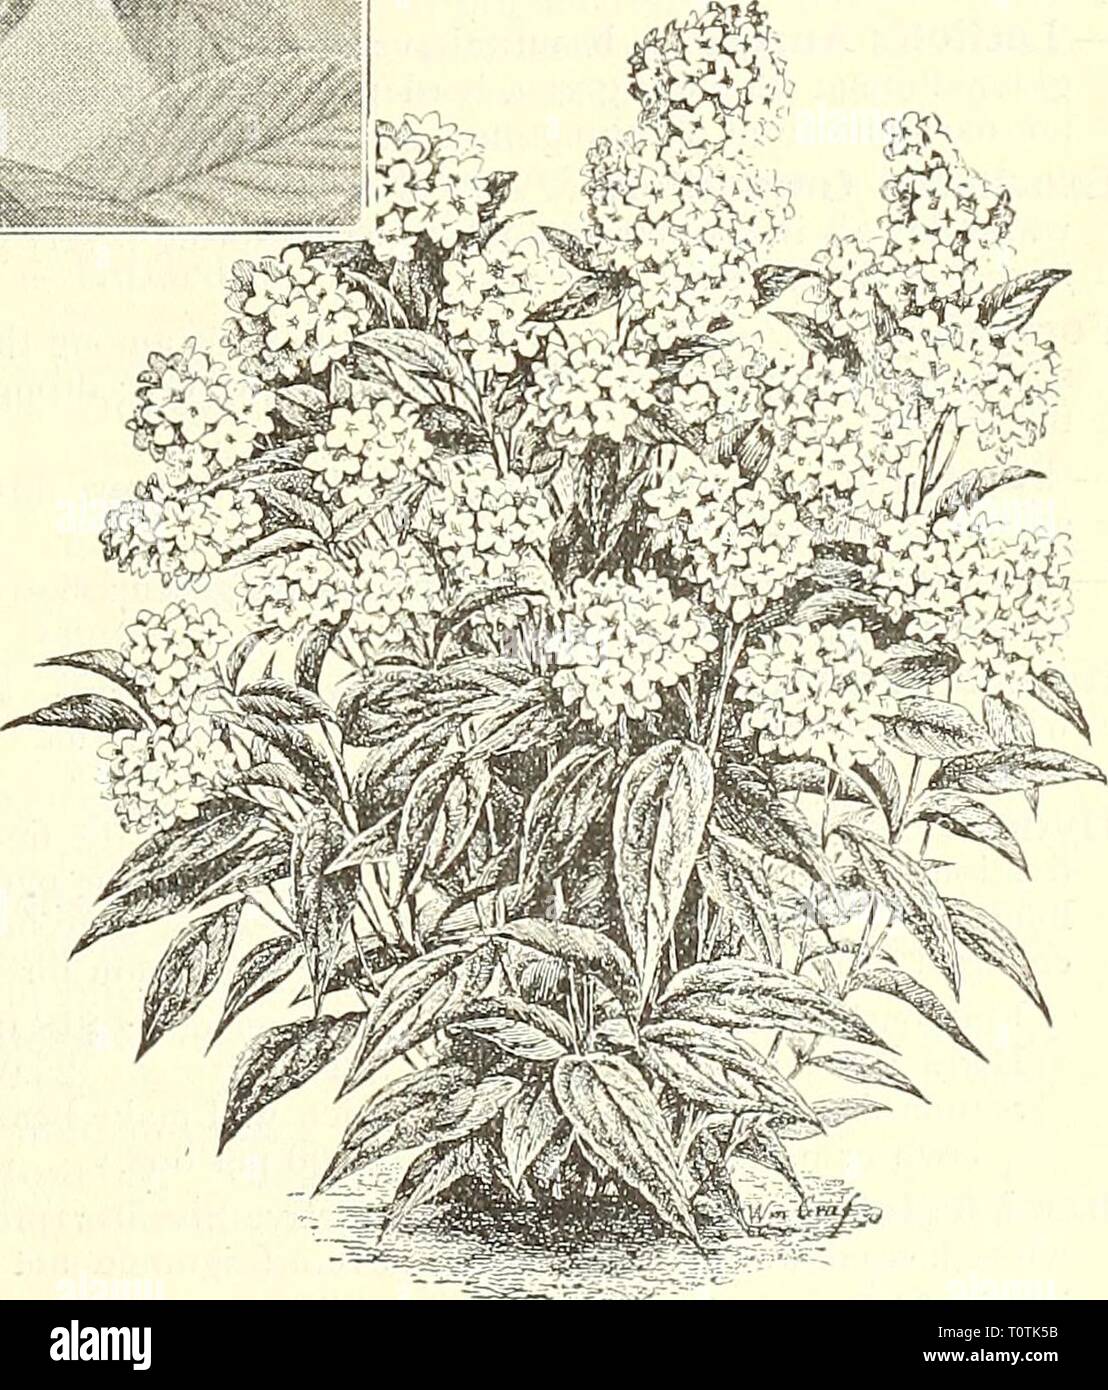 Dreer's garden book  1904 Dreer's garden book : 1904  dreersgardenbook1904henr Year: 1904  Deutzia Lemoinei. We offer cash prizes for photographs of Shrubs, etc. For details see page 4. Stock Photo